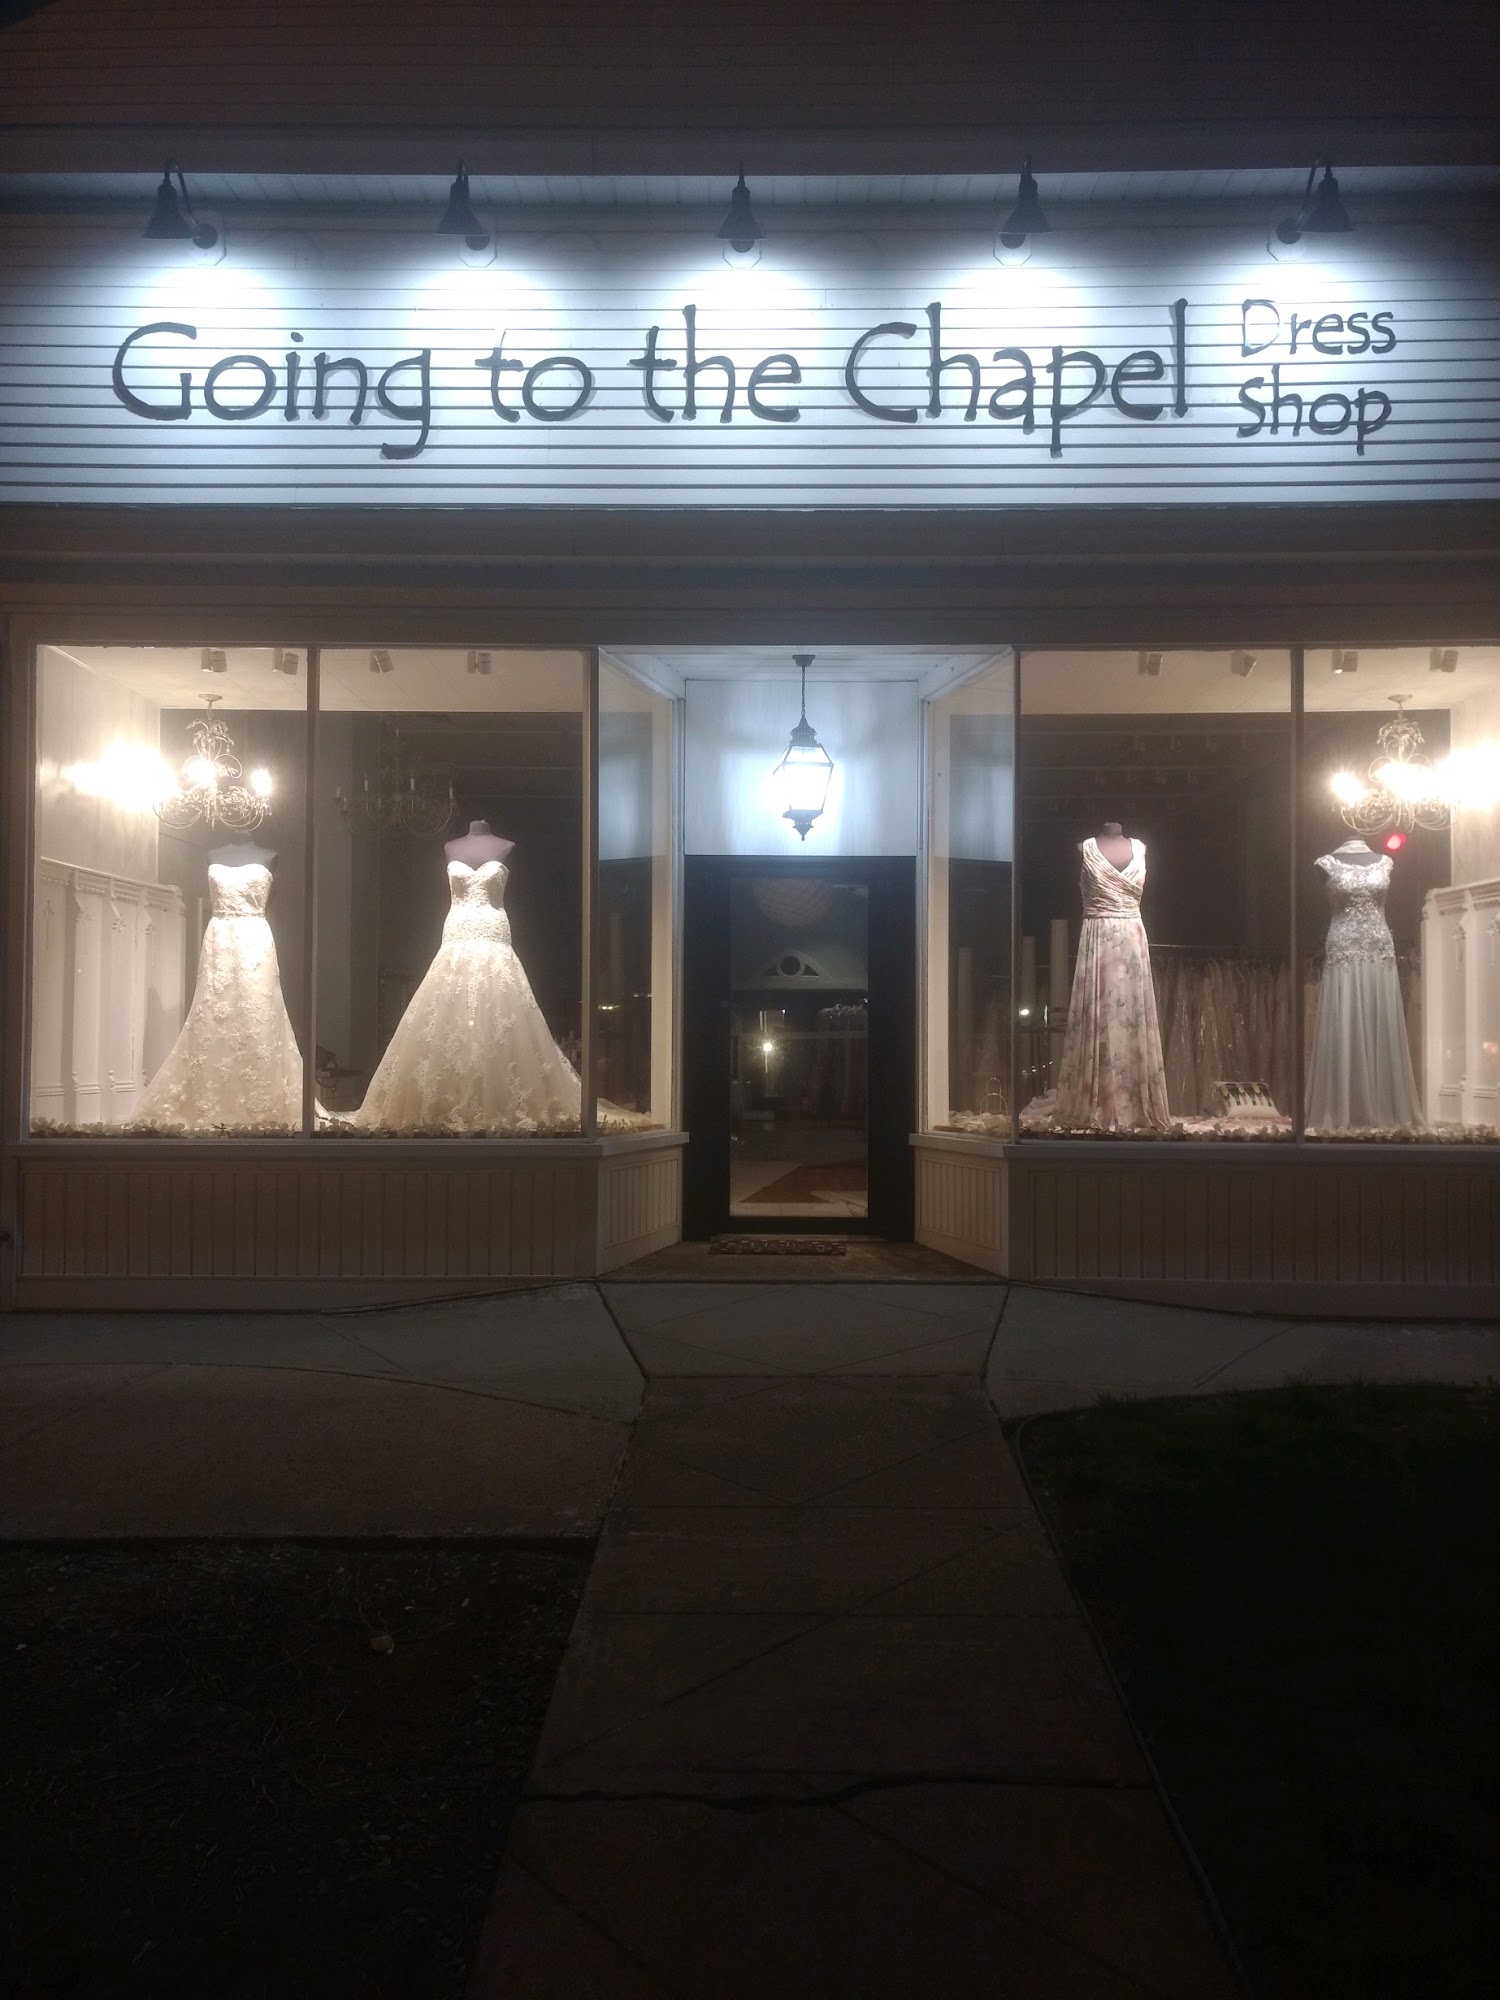 Going to the Chapel dress shop